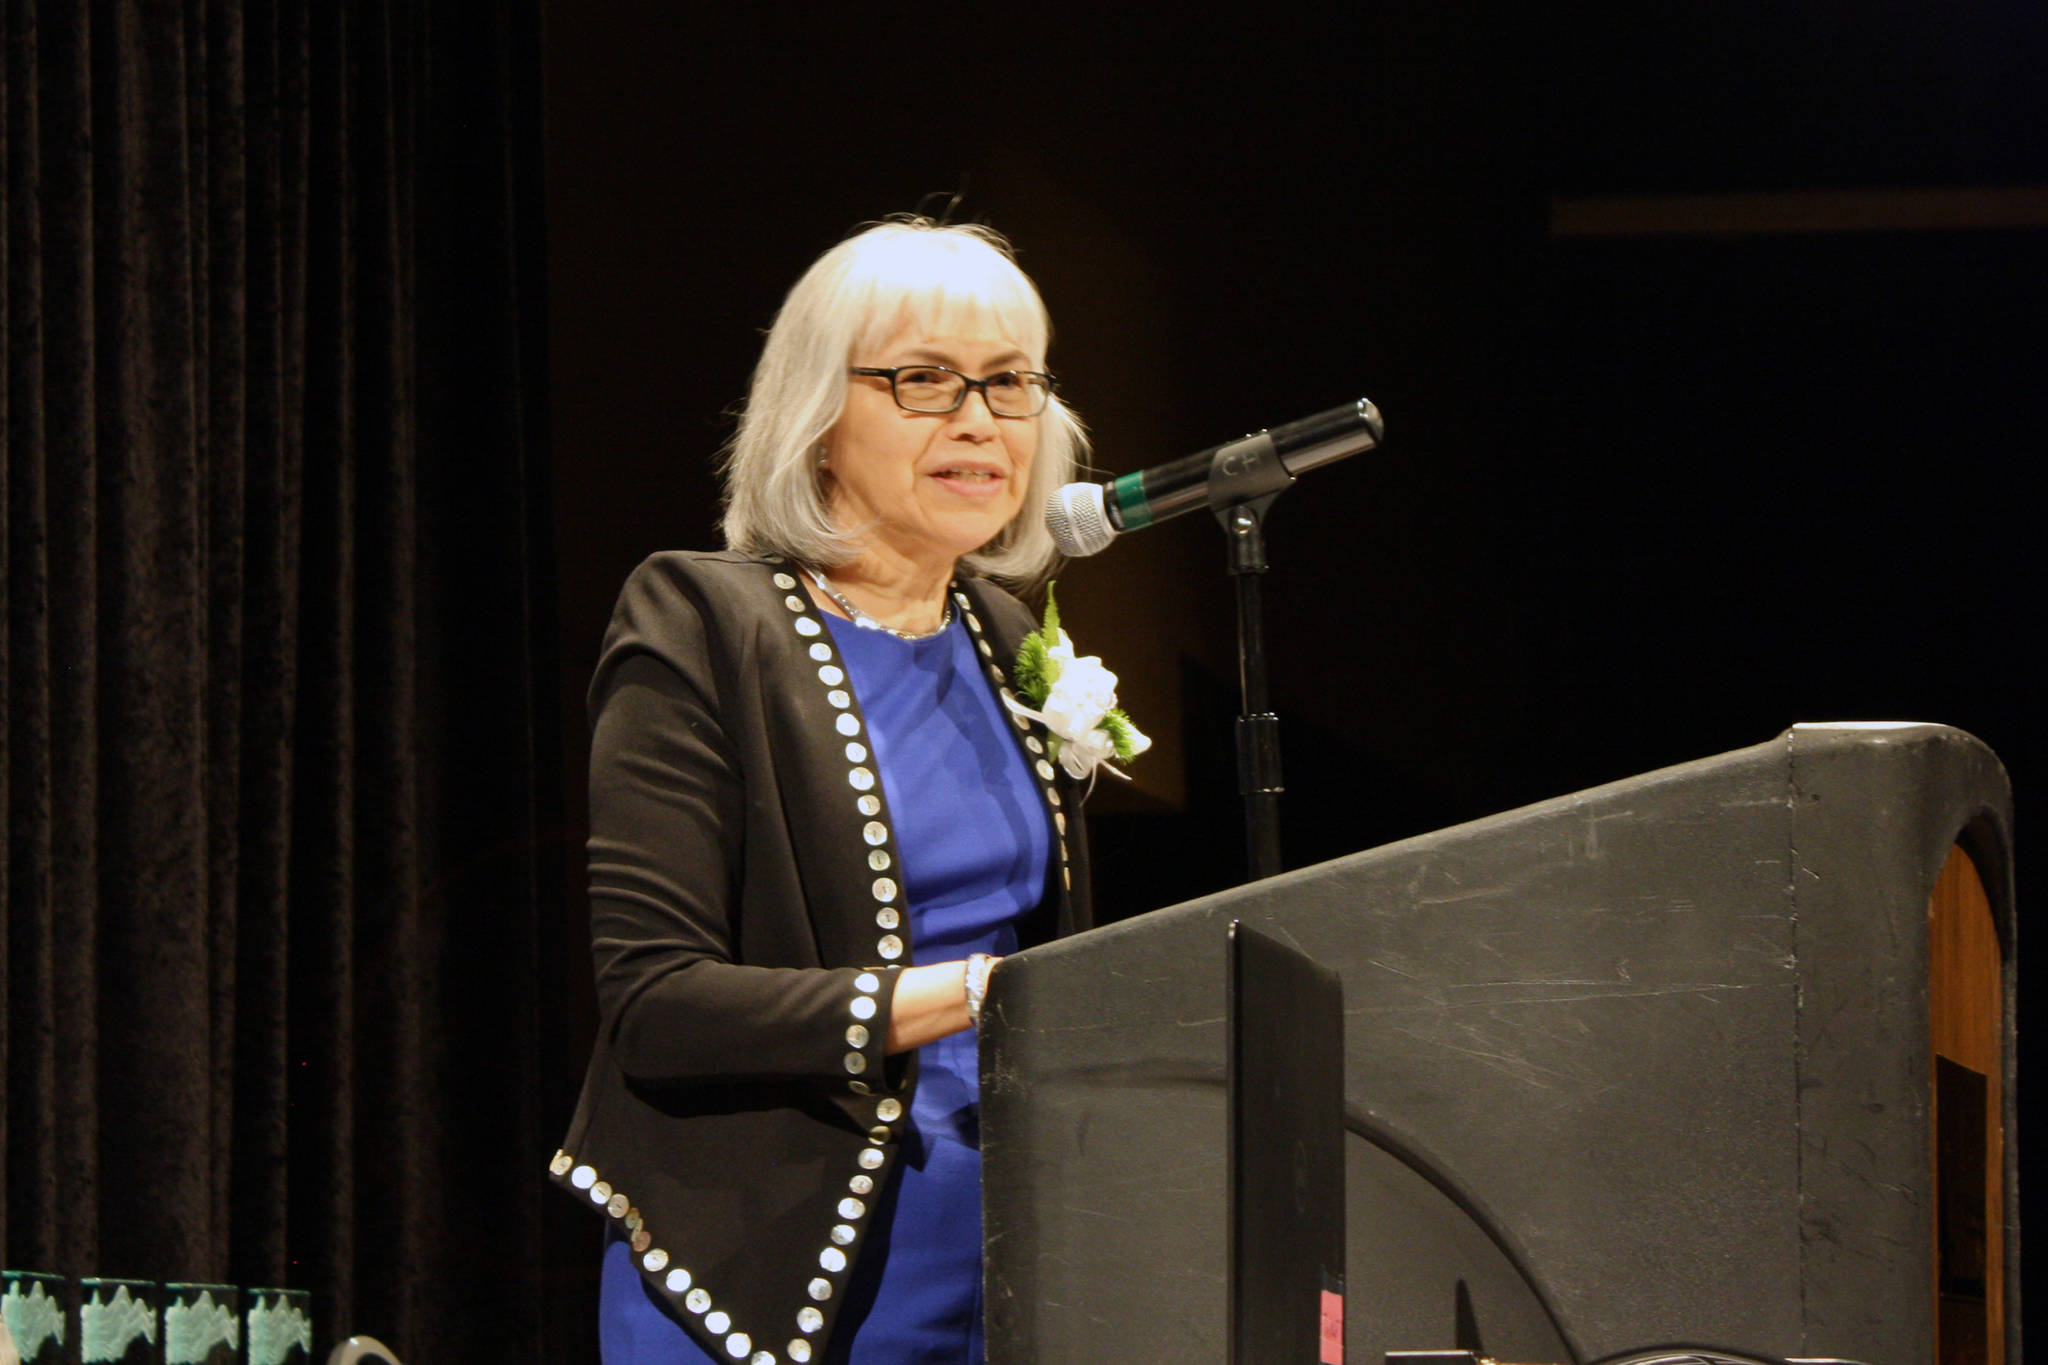 Francine Eddy Jones speaks during the Woman of Distinction 2019 Celebration Saturday, March 9, 2019 at Centennial Hall. During her speech she spoke about the important roles her parents, family and colleagues have played in her life. Jones also spoke about the impact Alaska Native value had on her life. (Ben Hohenstatt | Capital City Weekly)